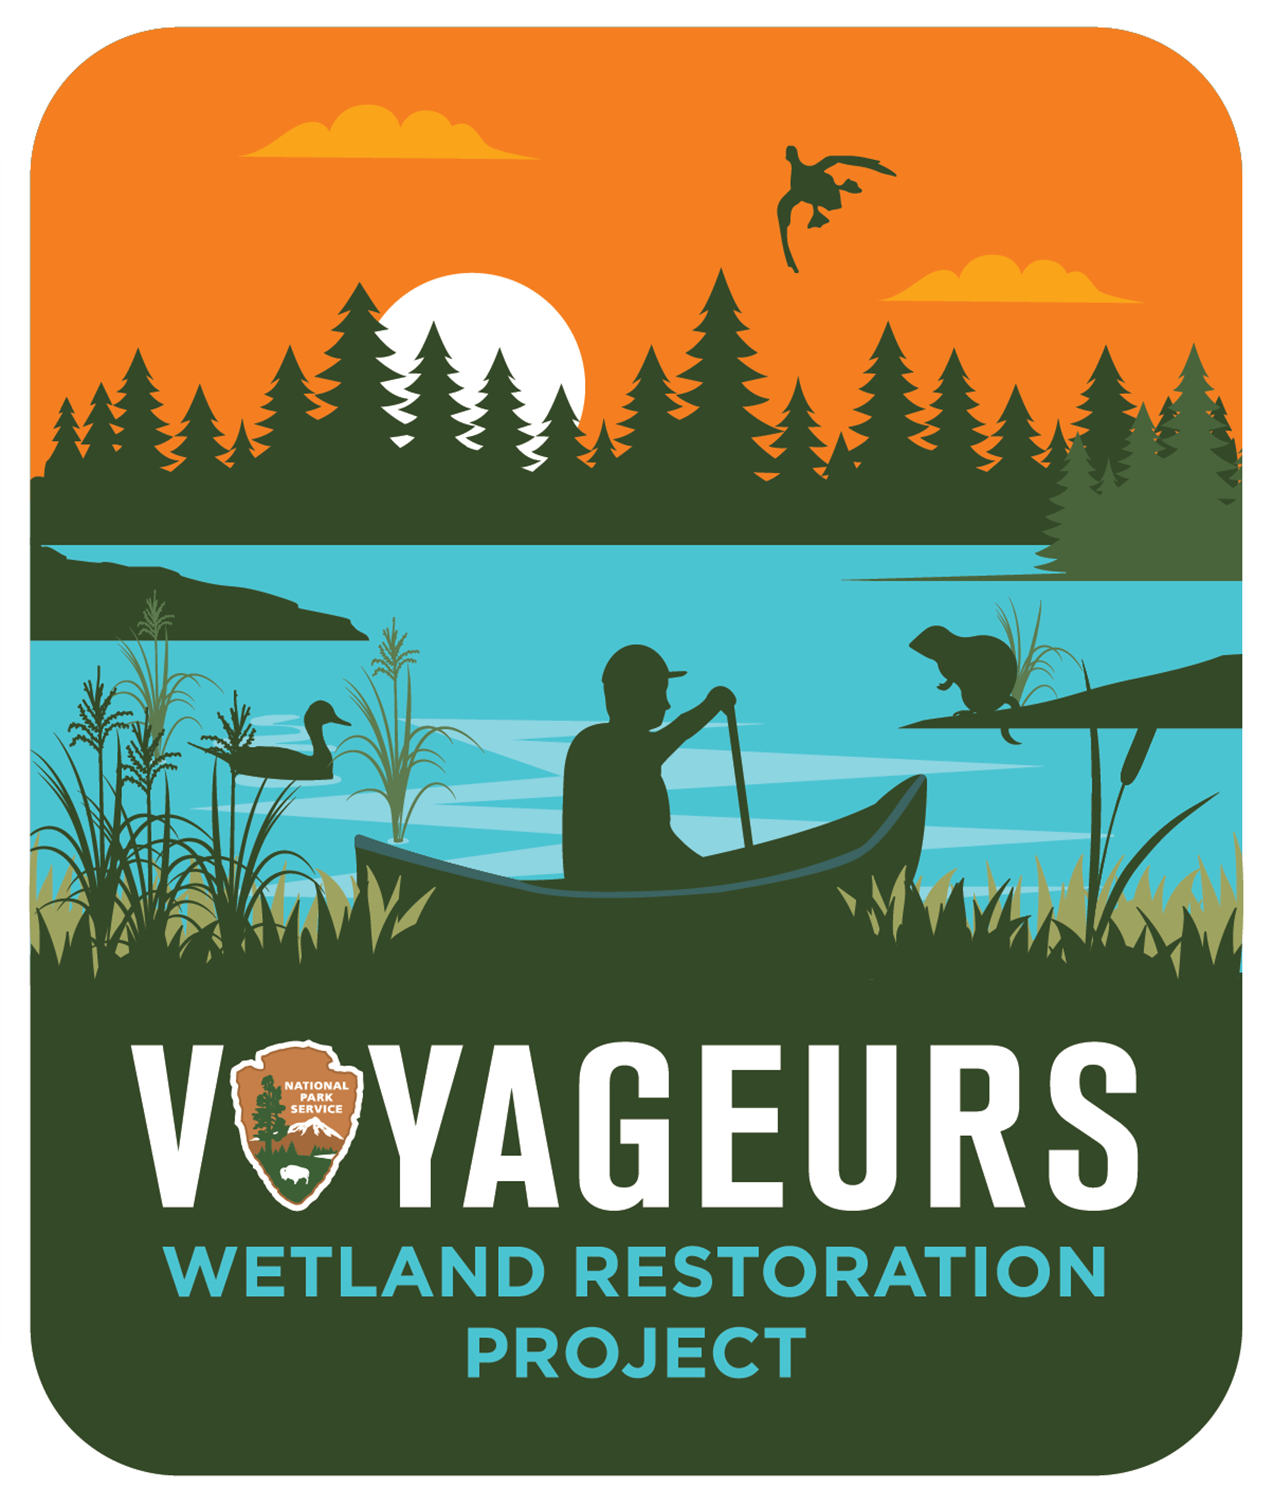 illustrated square logo depicting a person in a canoe on a lake with trees and sunset in background